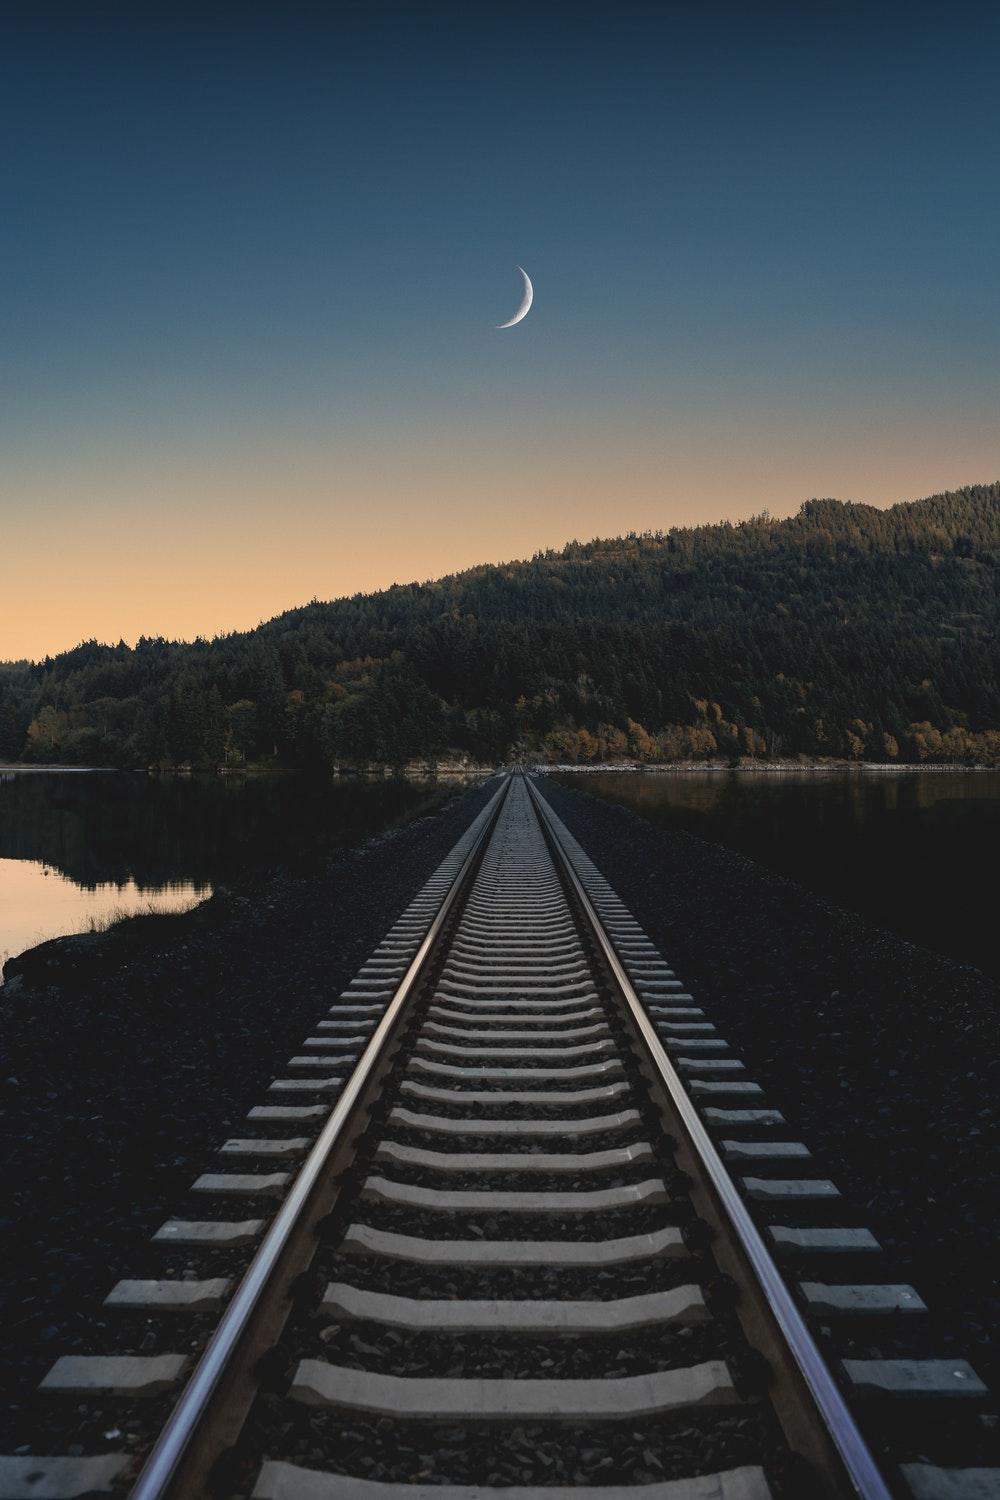 Train track, track, moon and sunset